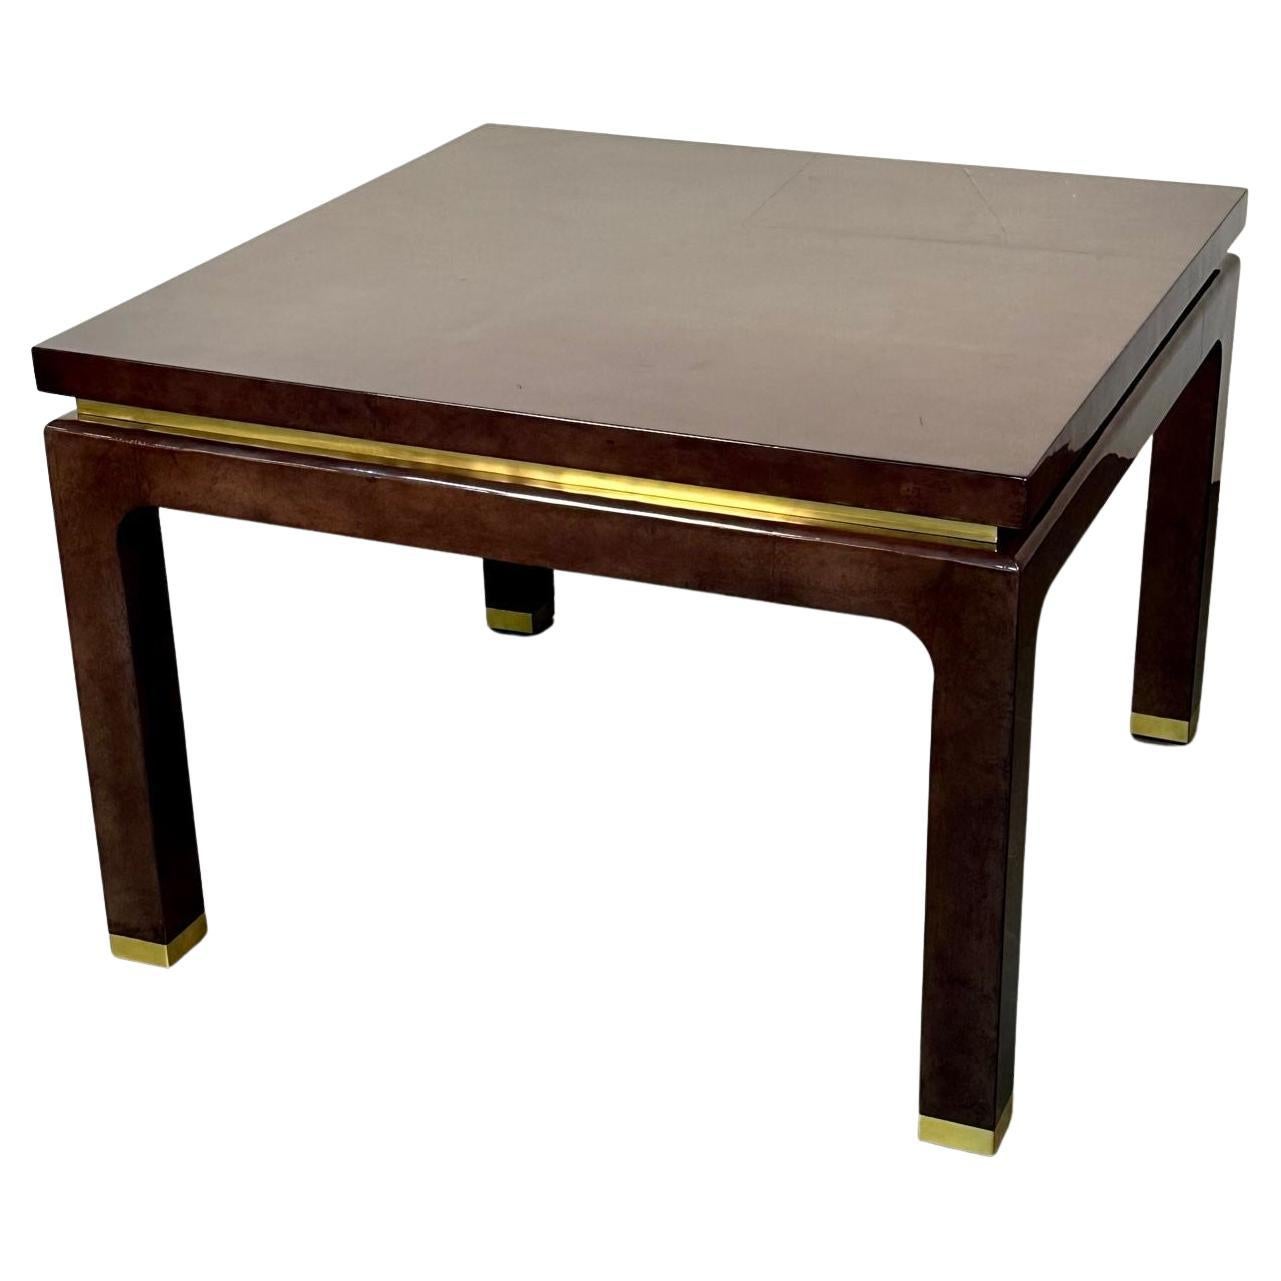 Mid-Century Modern Square Game / Center Table, Lacquer and Brass, Springer Style For Sale